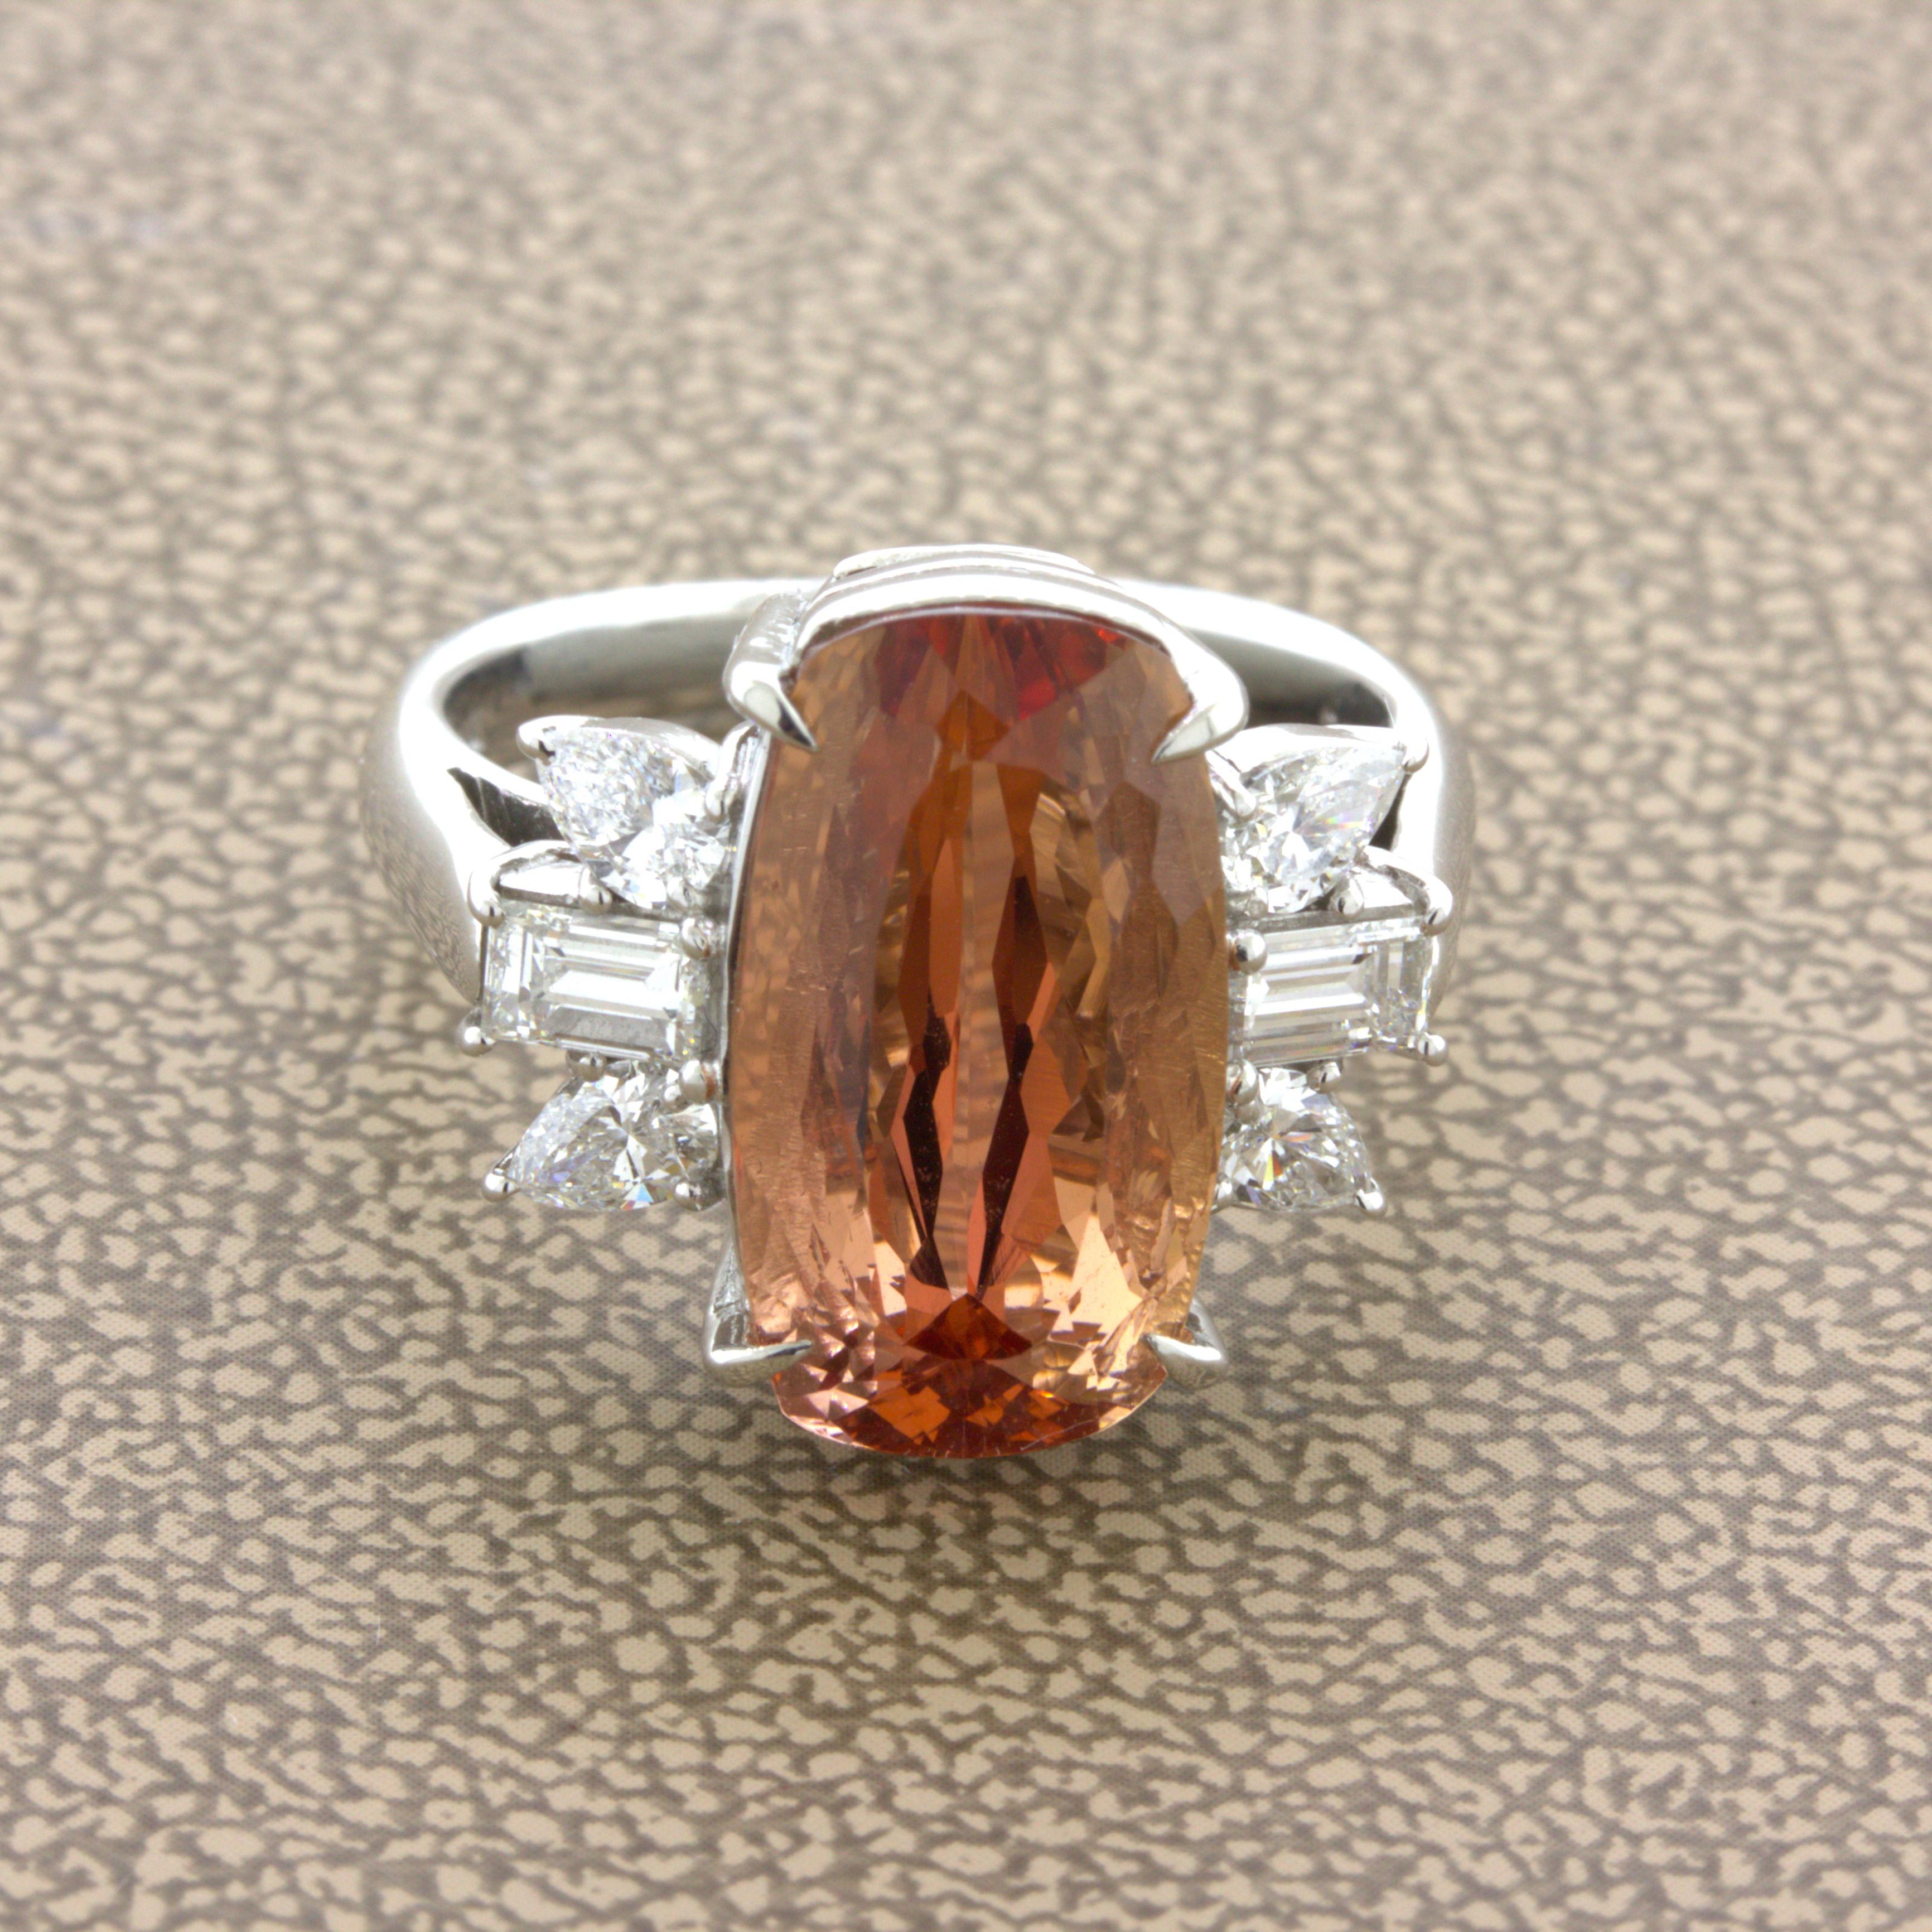 A chic and elegant platinum ring featuring a very fine imperial topaz. It weighs an impressive 8.05 carats and has a unique intense red orange flame color not seen in any other gemstone. Adding to that, the topaz has a sleek elongated cushion-cut